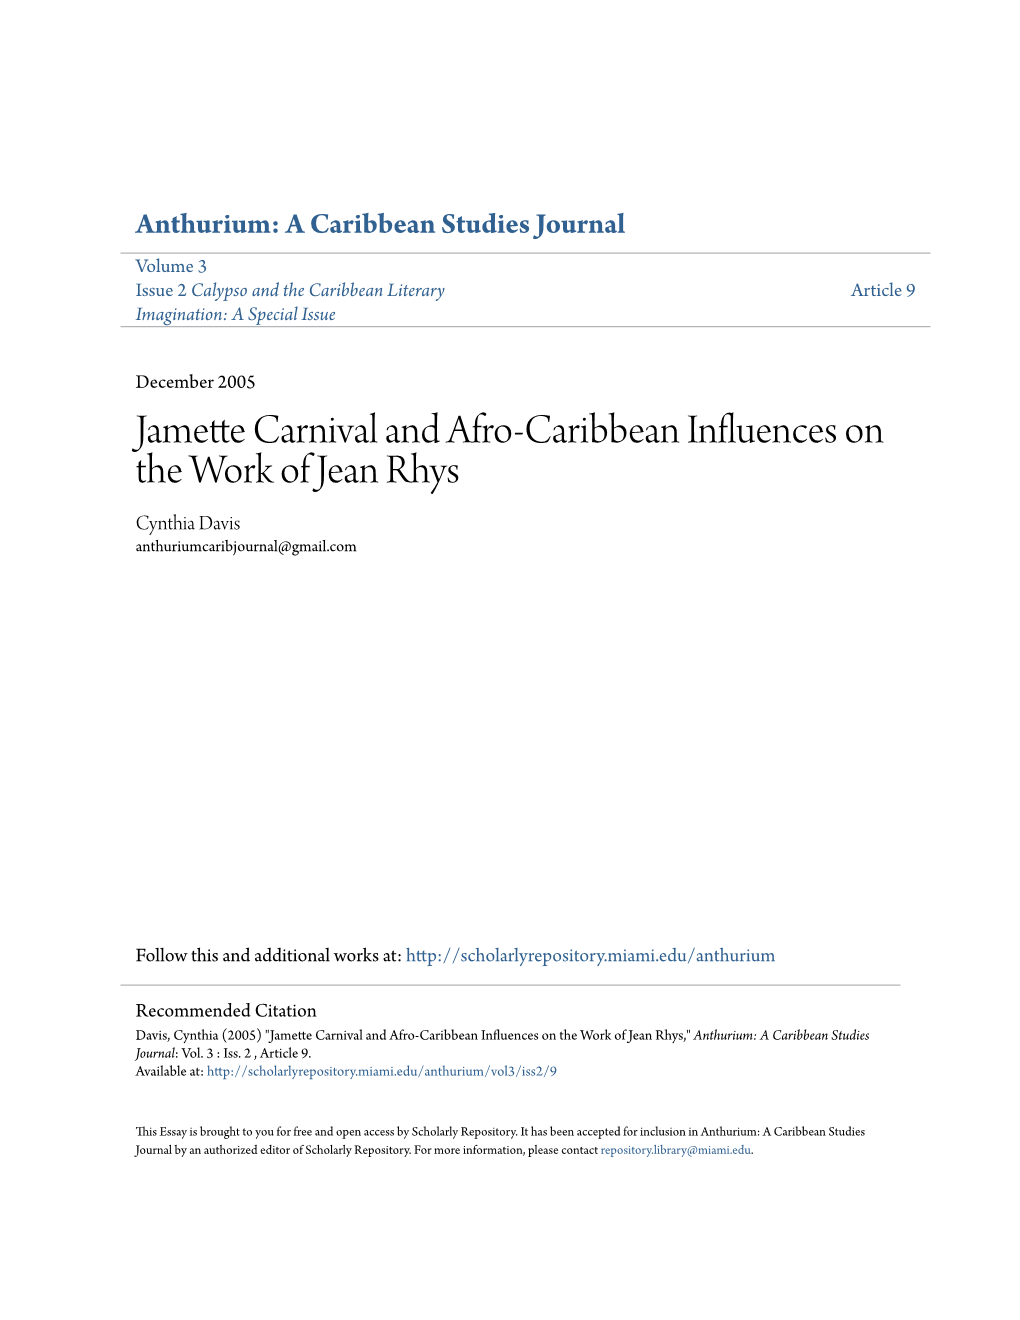 Jamette Carnival and Afro-Caribbean Influences on the Work of Jean Rhys Cynthia Davis Anthuriumcaribjournal@Gmail.Com